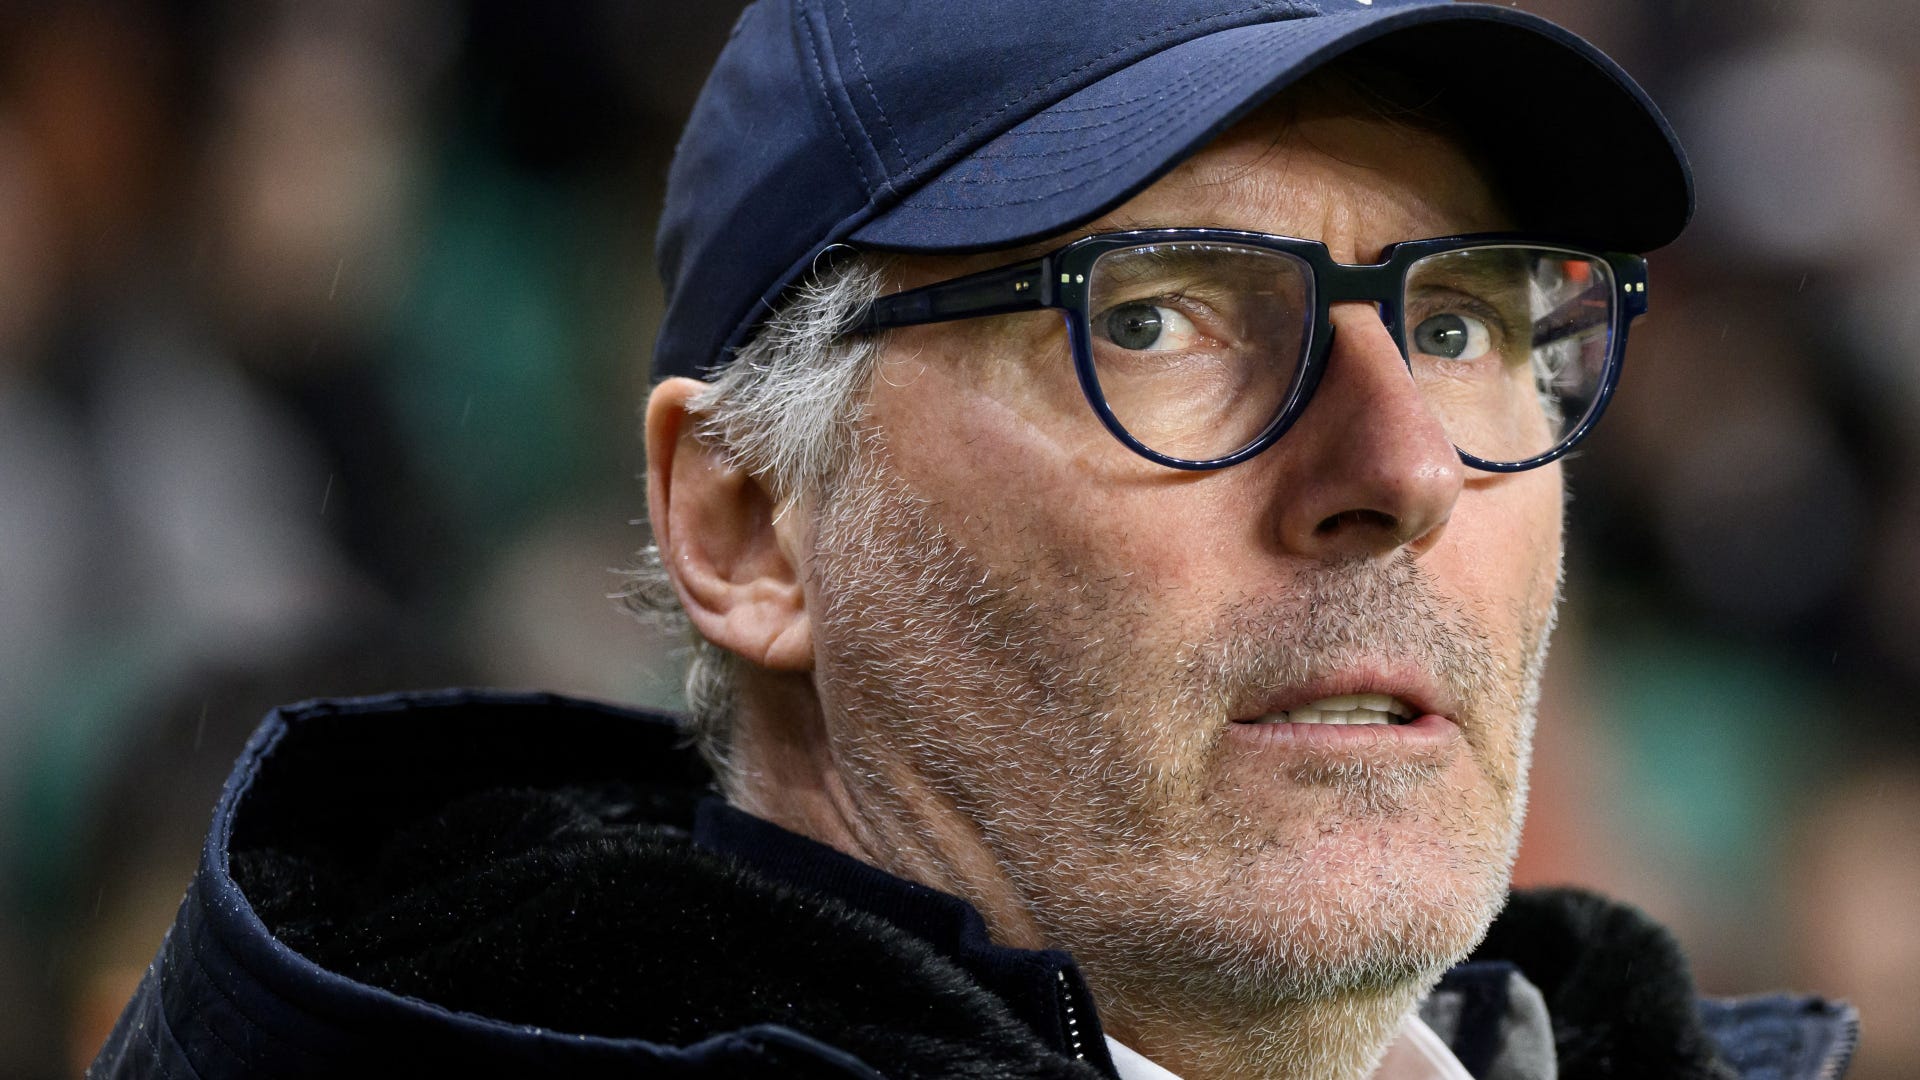 Lyon and manager Laurent Blanc ‘mutually part ways’ after 11-month stint